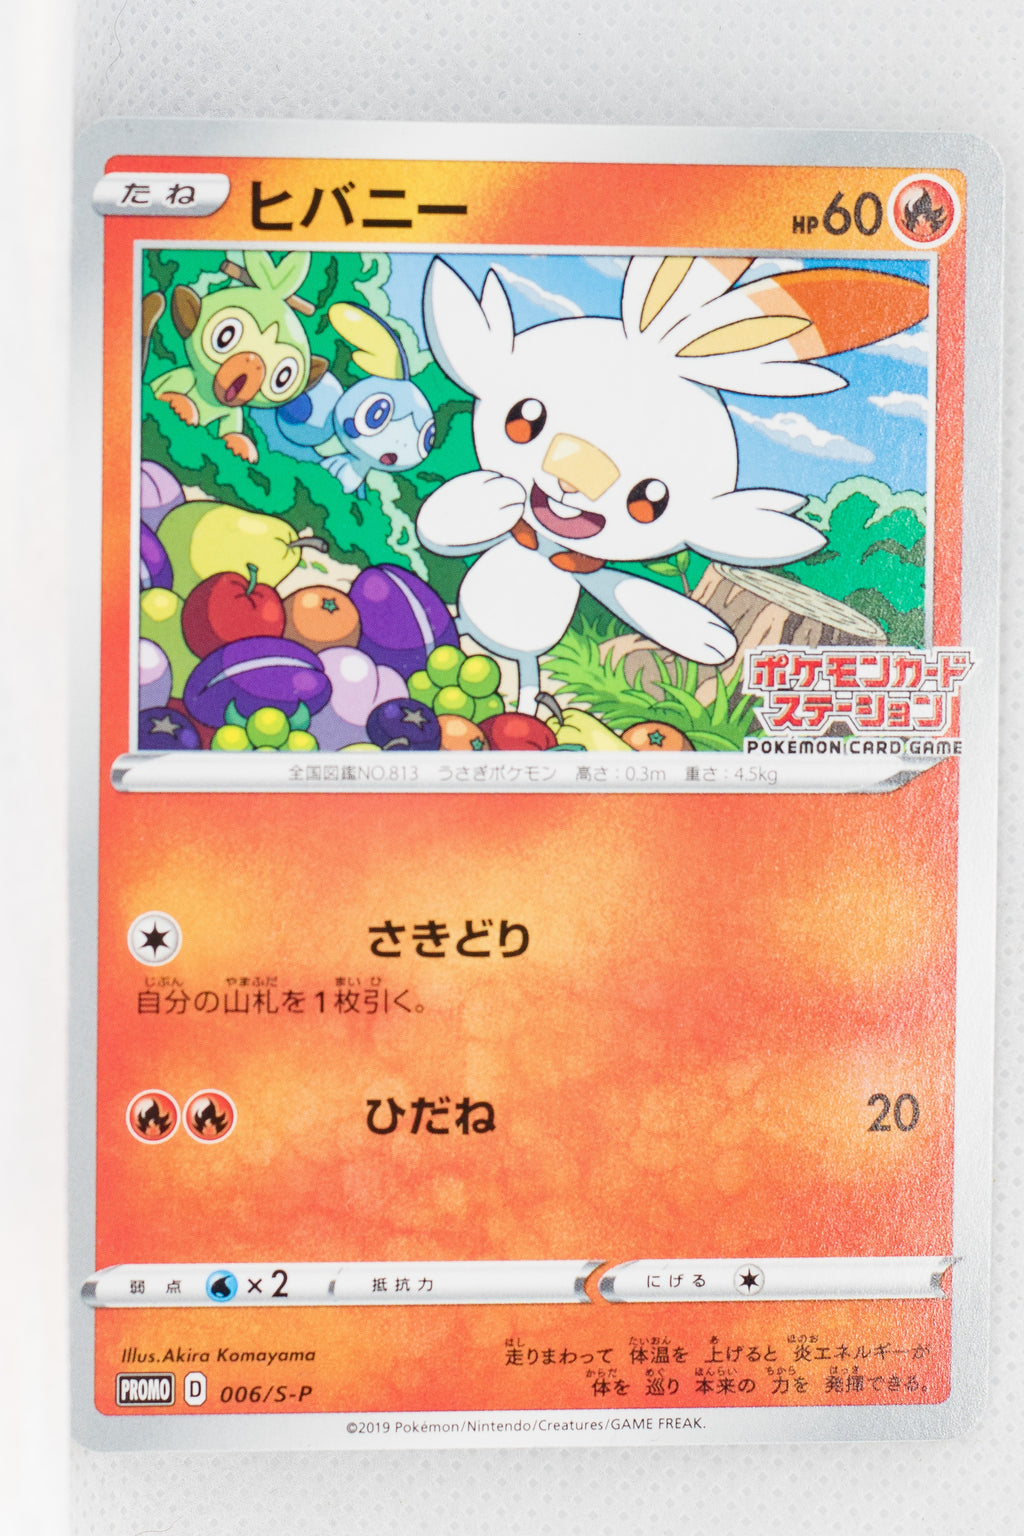 006 S P Scorbunny Pokemon Card Station Event Participation Prize Thecardcollector Uk